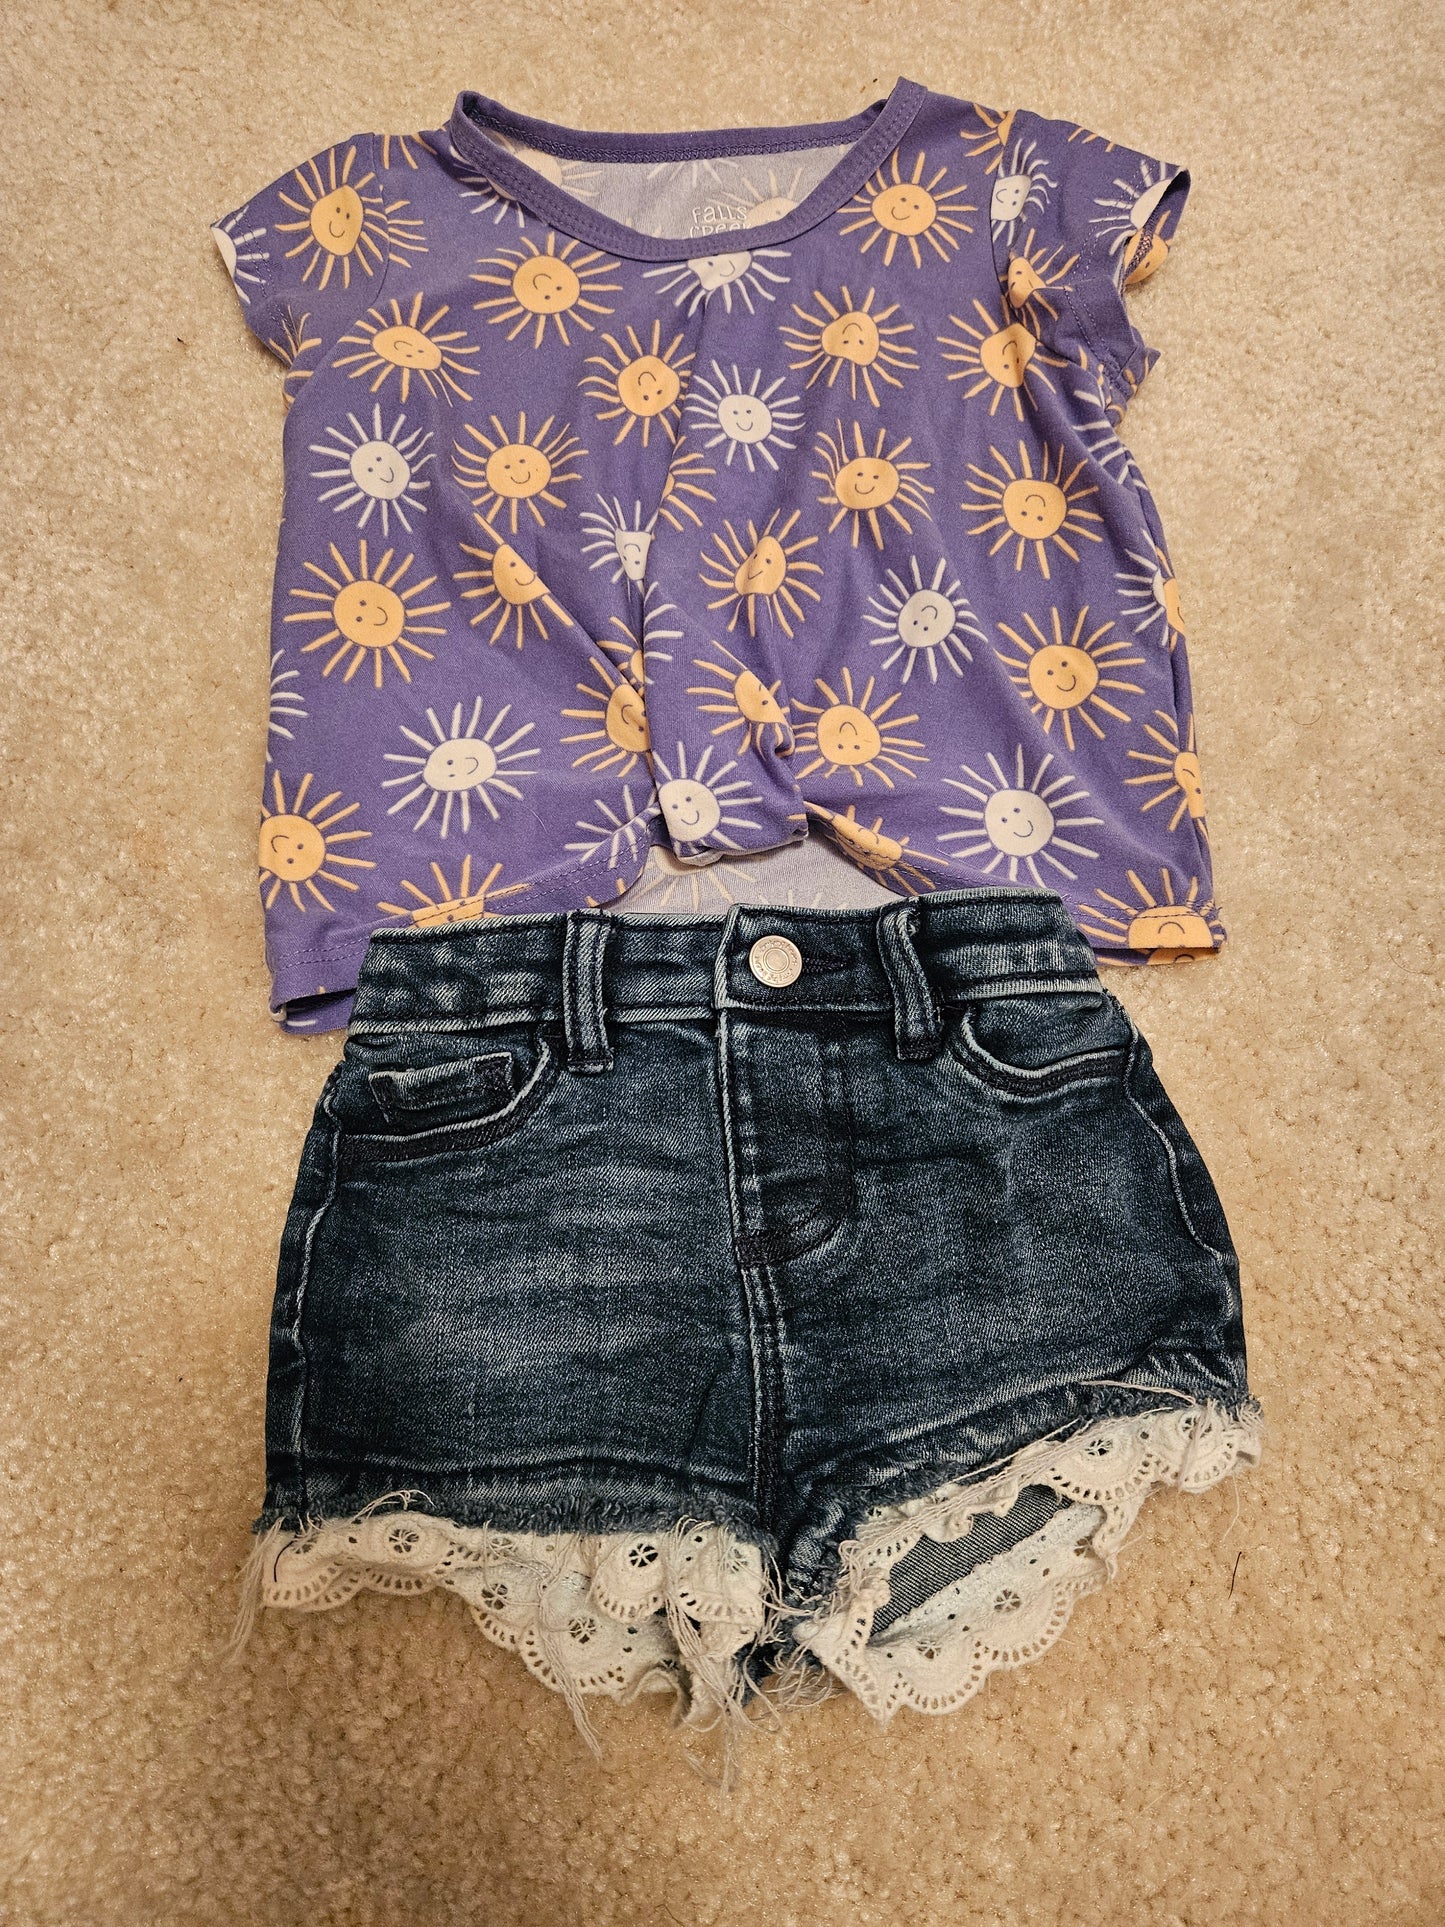 *REDUCED: 18 month purple sunshine shirt with jean shorts